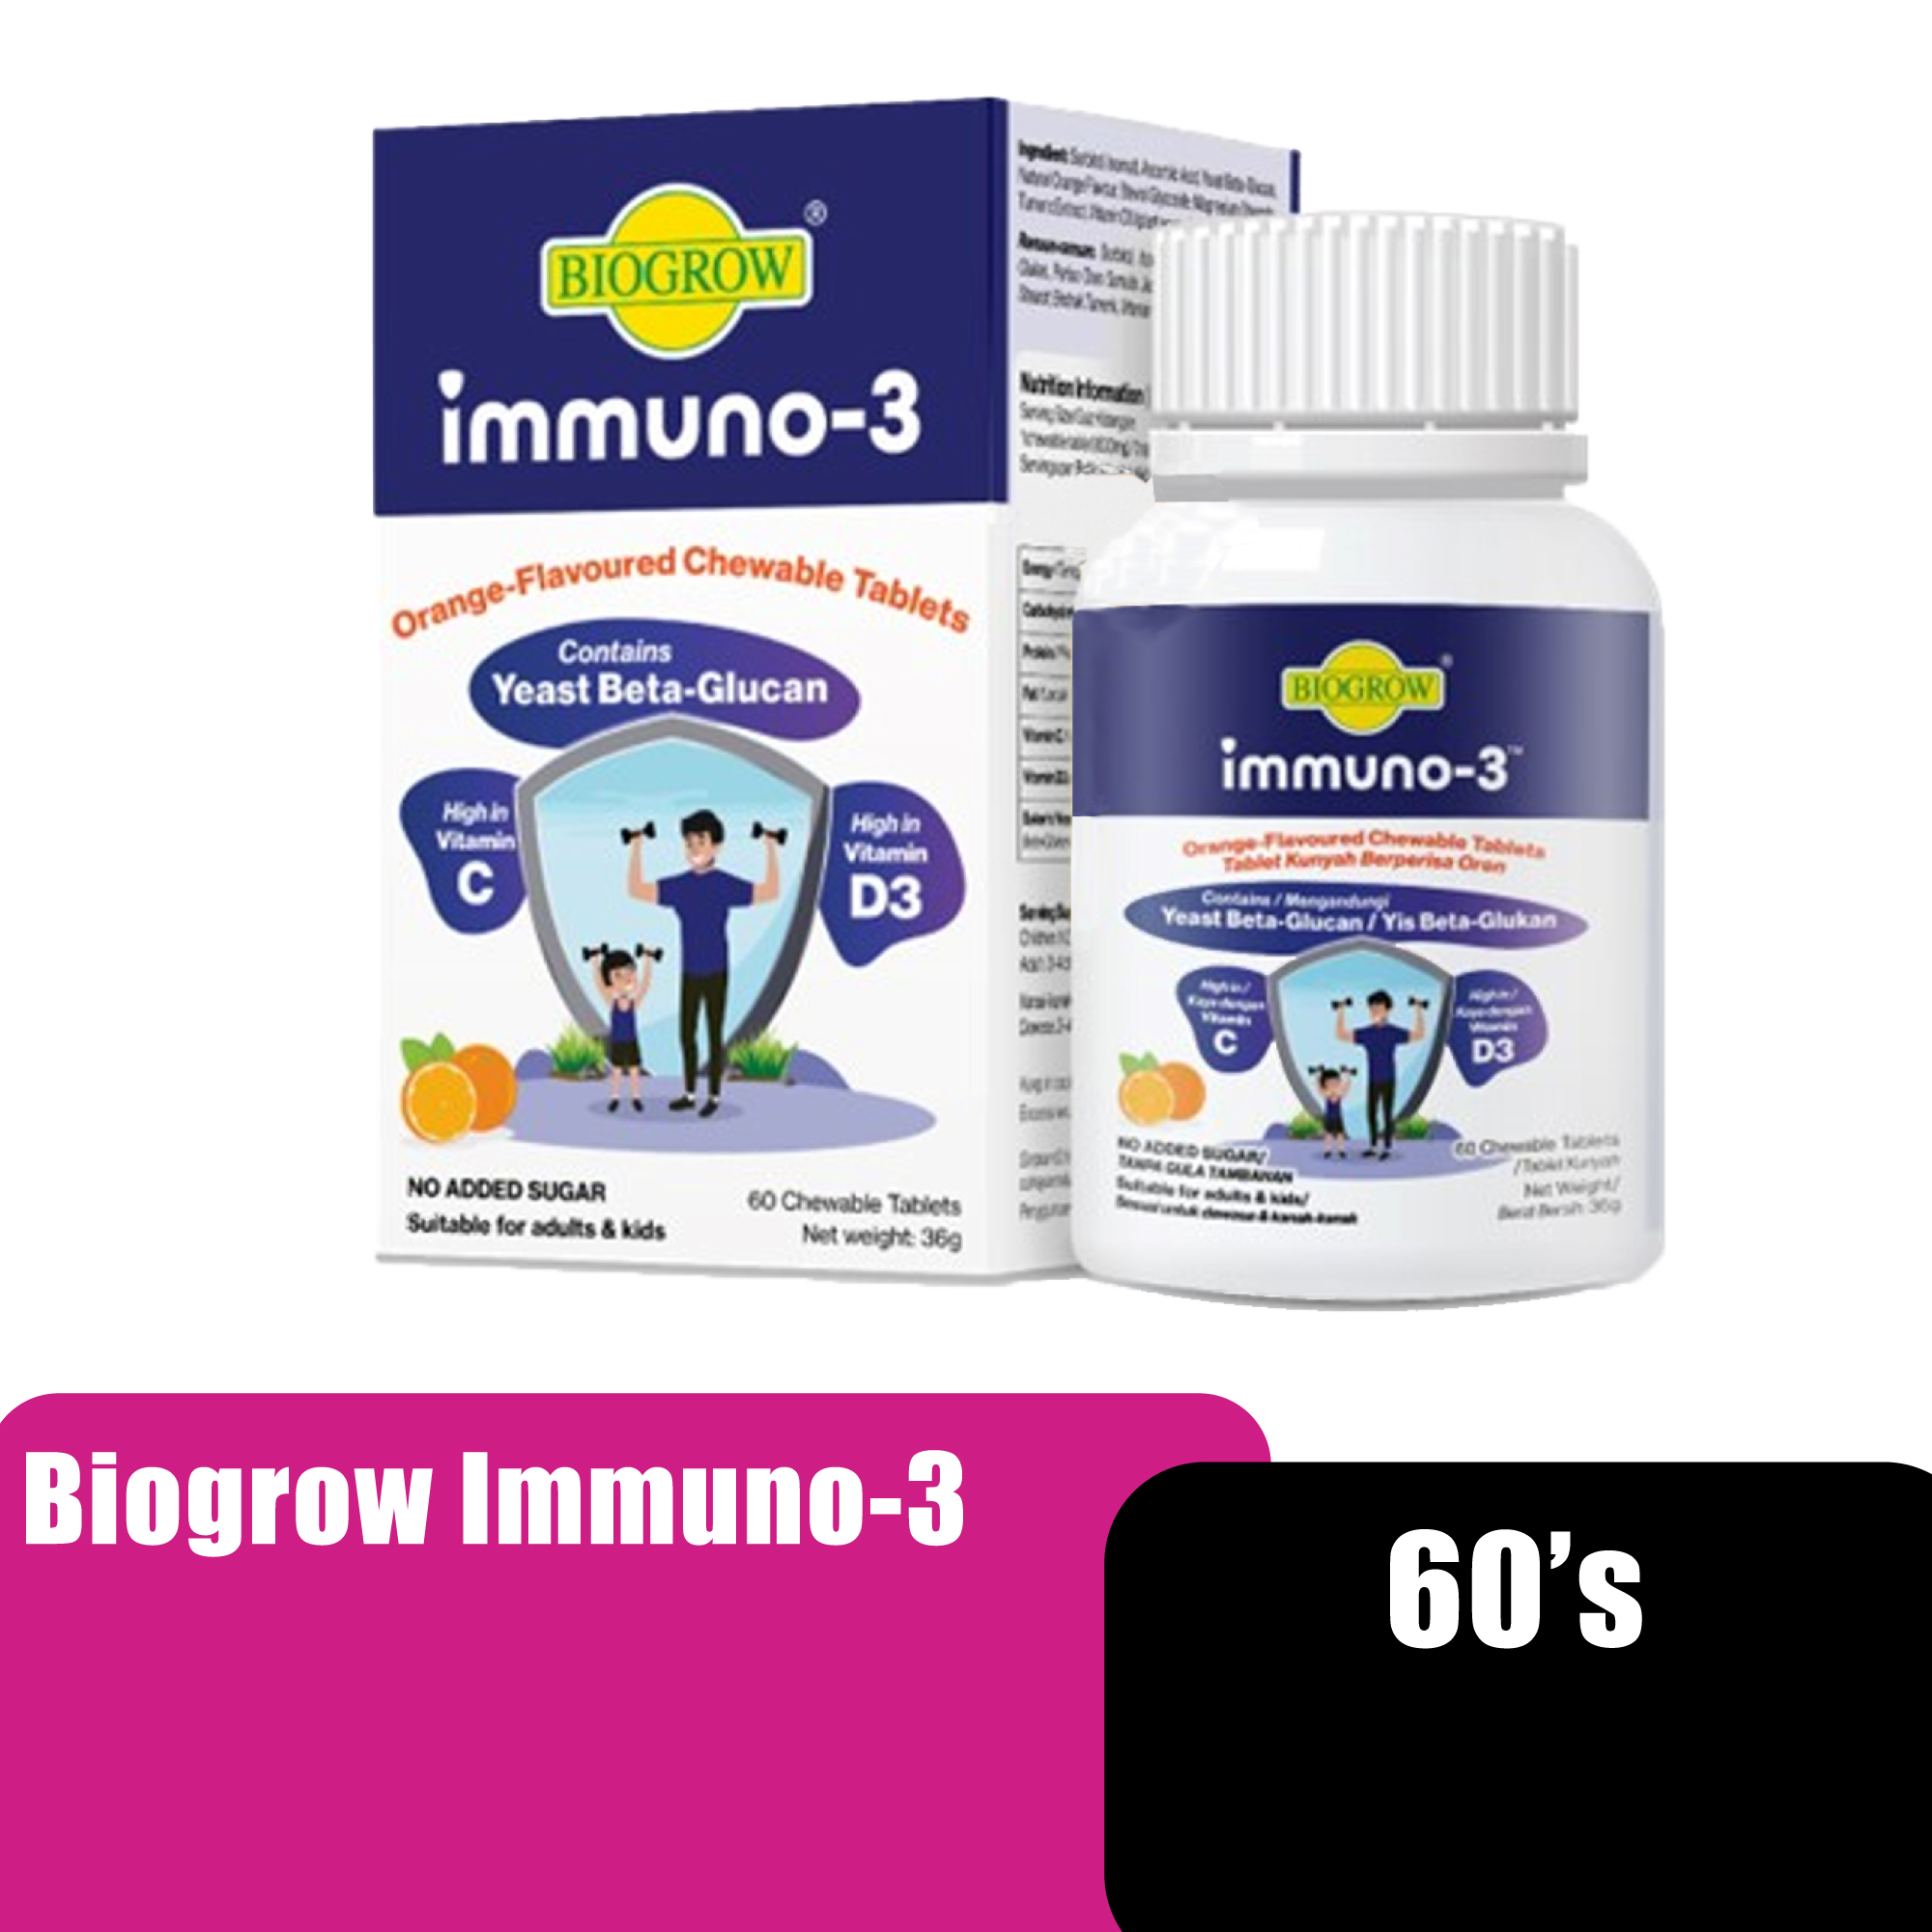 Biogrow Immuno 3 Chewable Tablets 60s Yeast Beta Glucan For Immune System - Orange Flavour (For adults & kids supplement